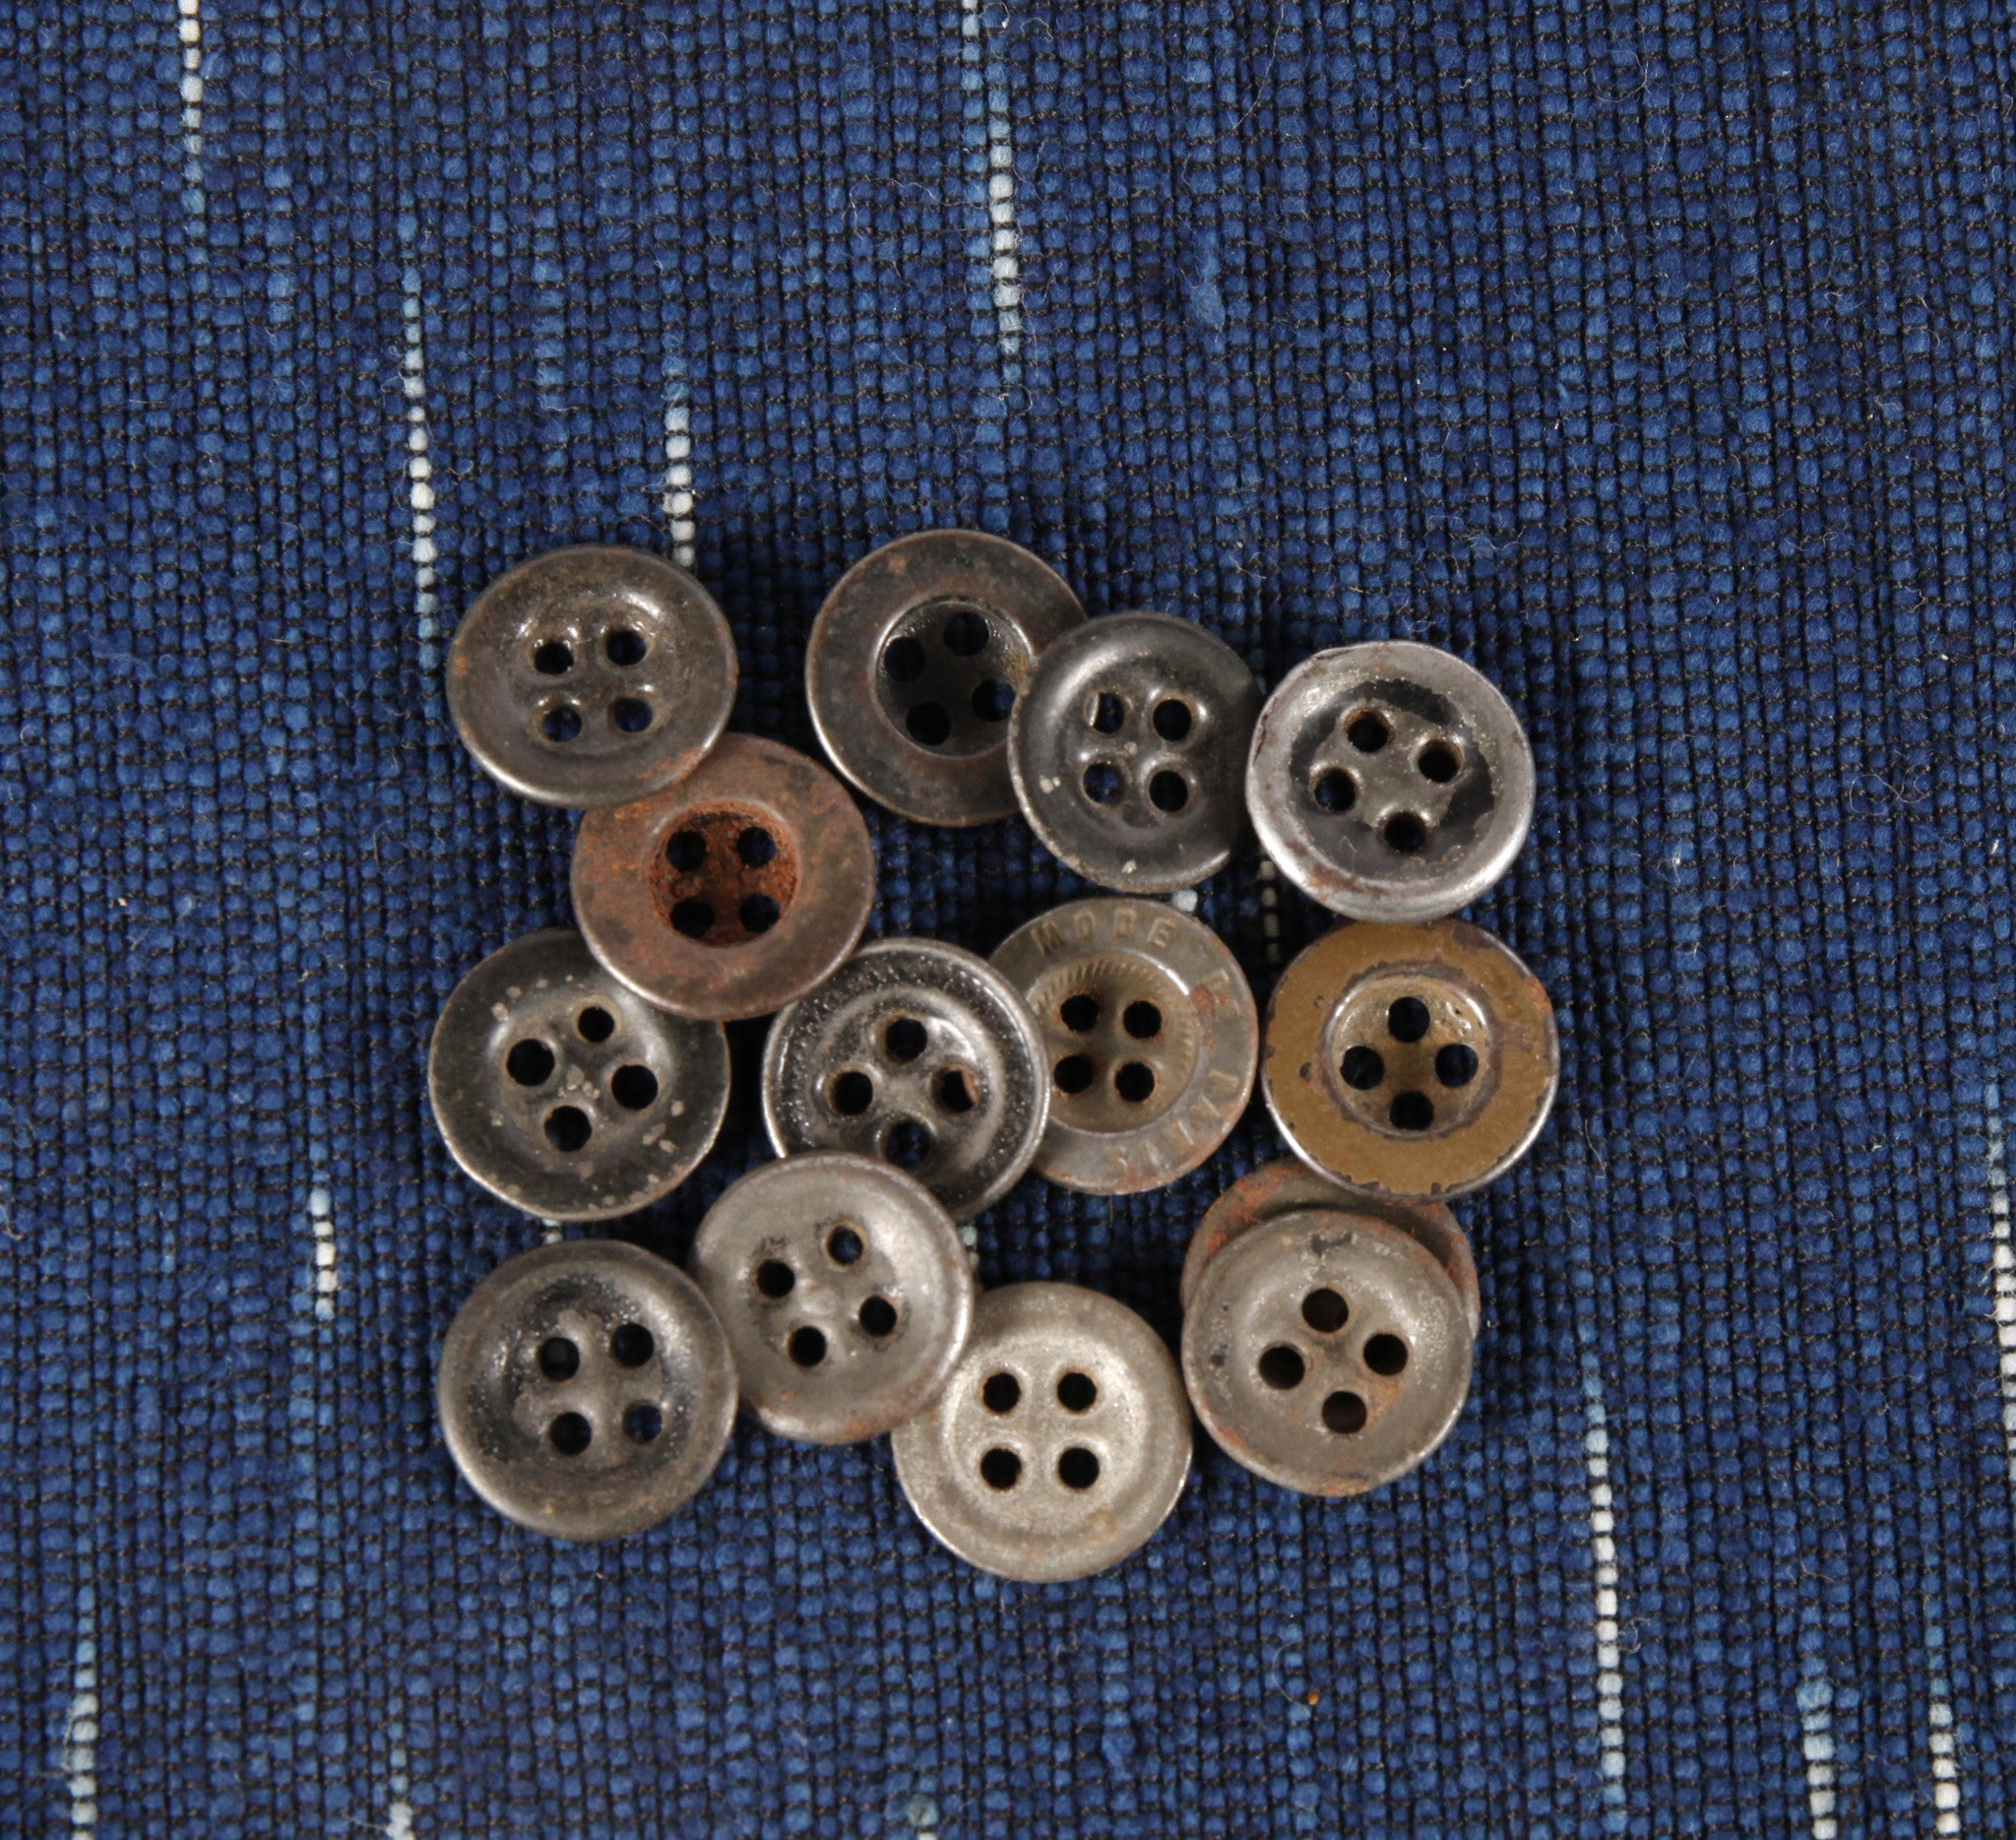 4 Hole Metal Buttons, Vintage Metal Buttons